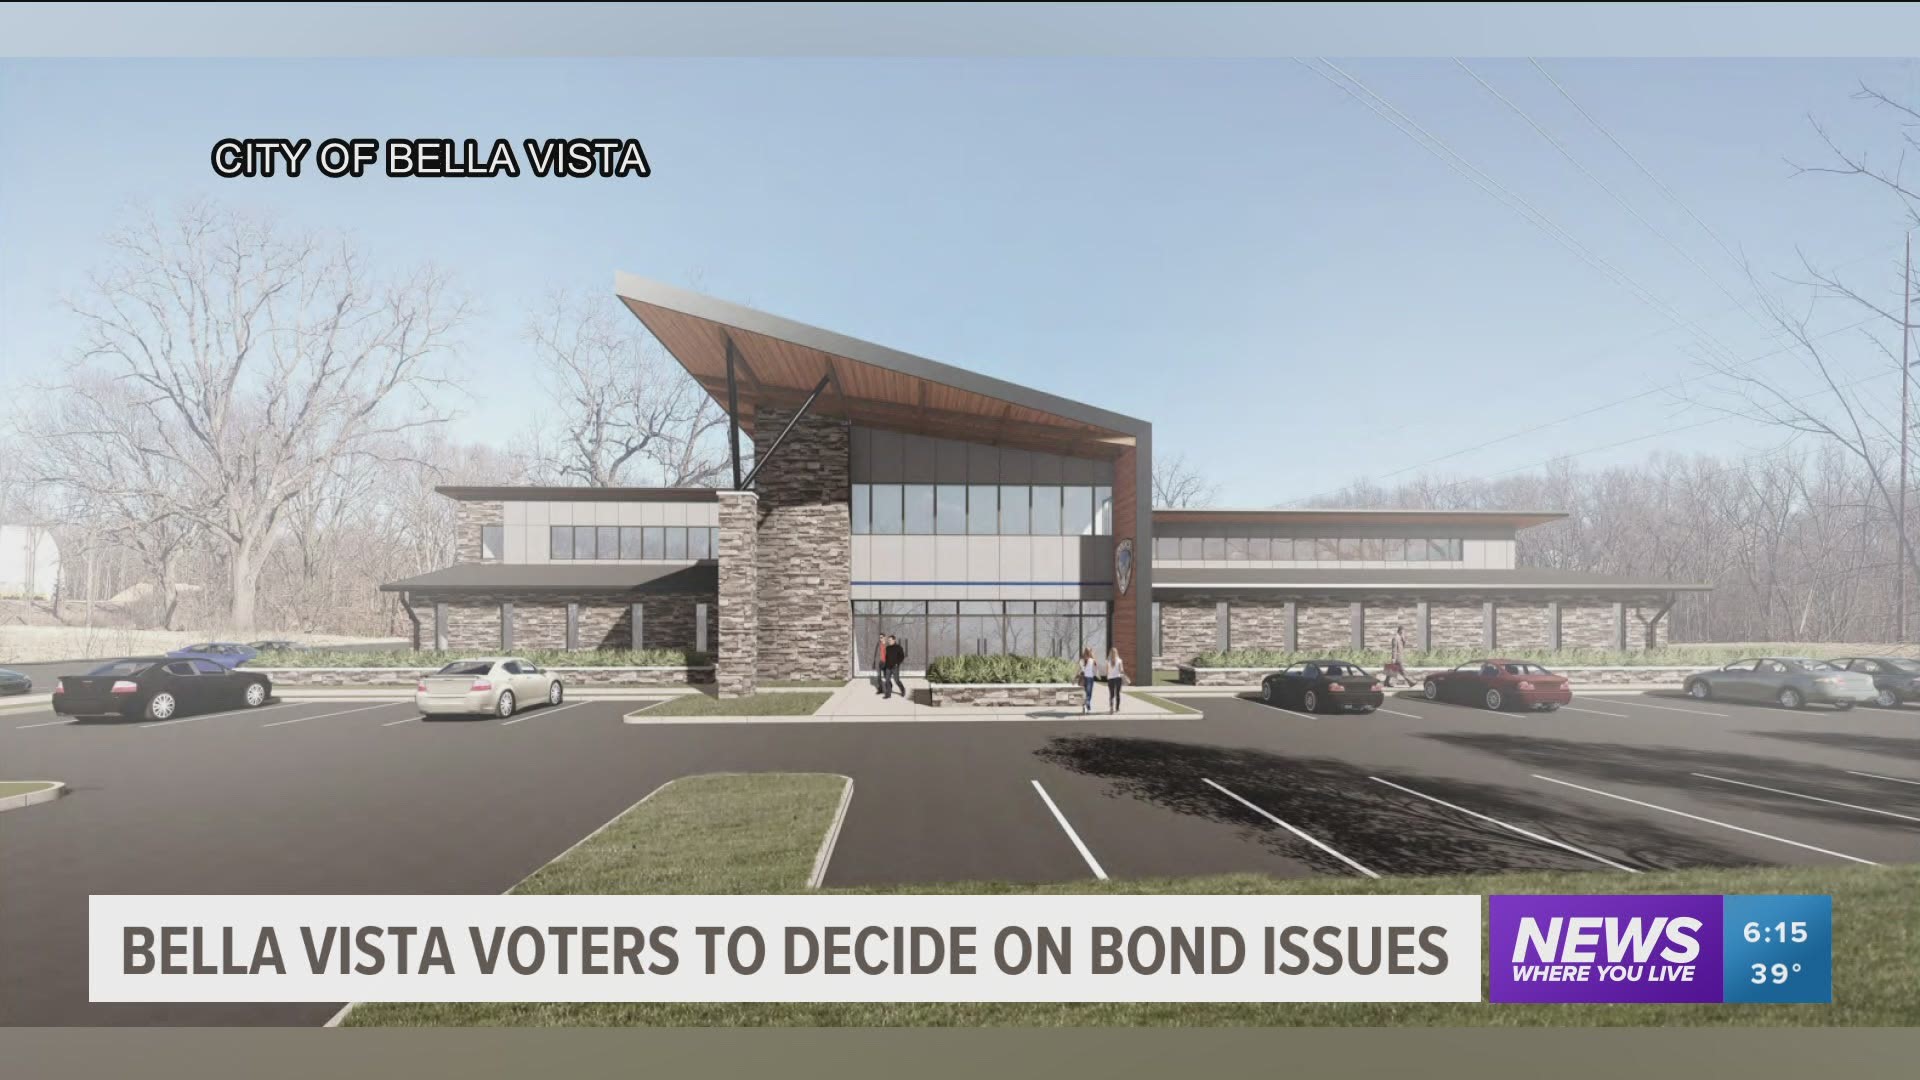 The City of Bella Vista is asking voters for a 1% sales tax increase to build three public safety facilitates.